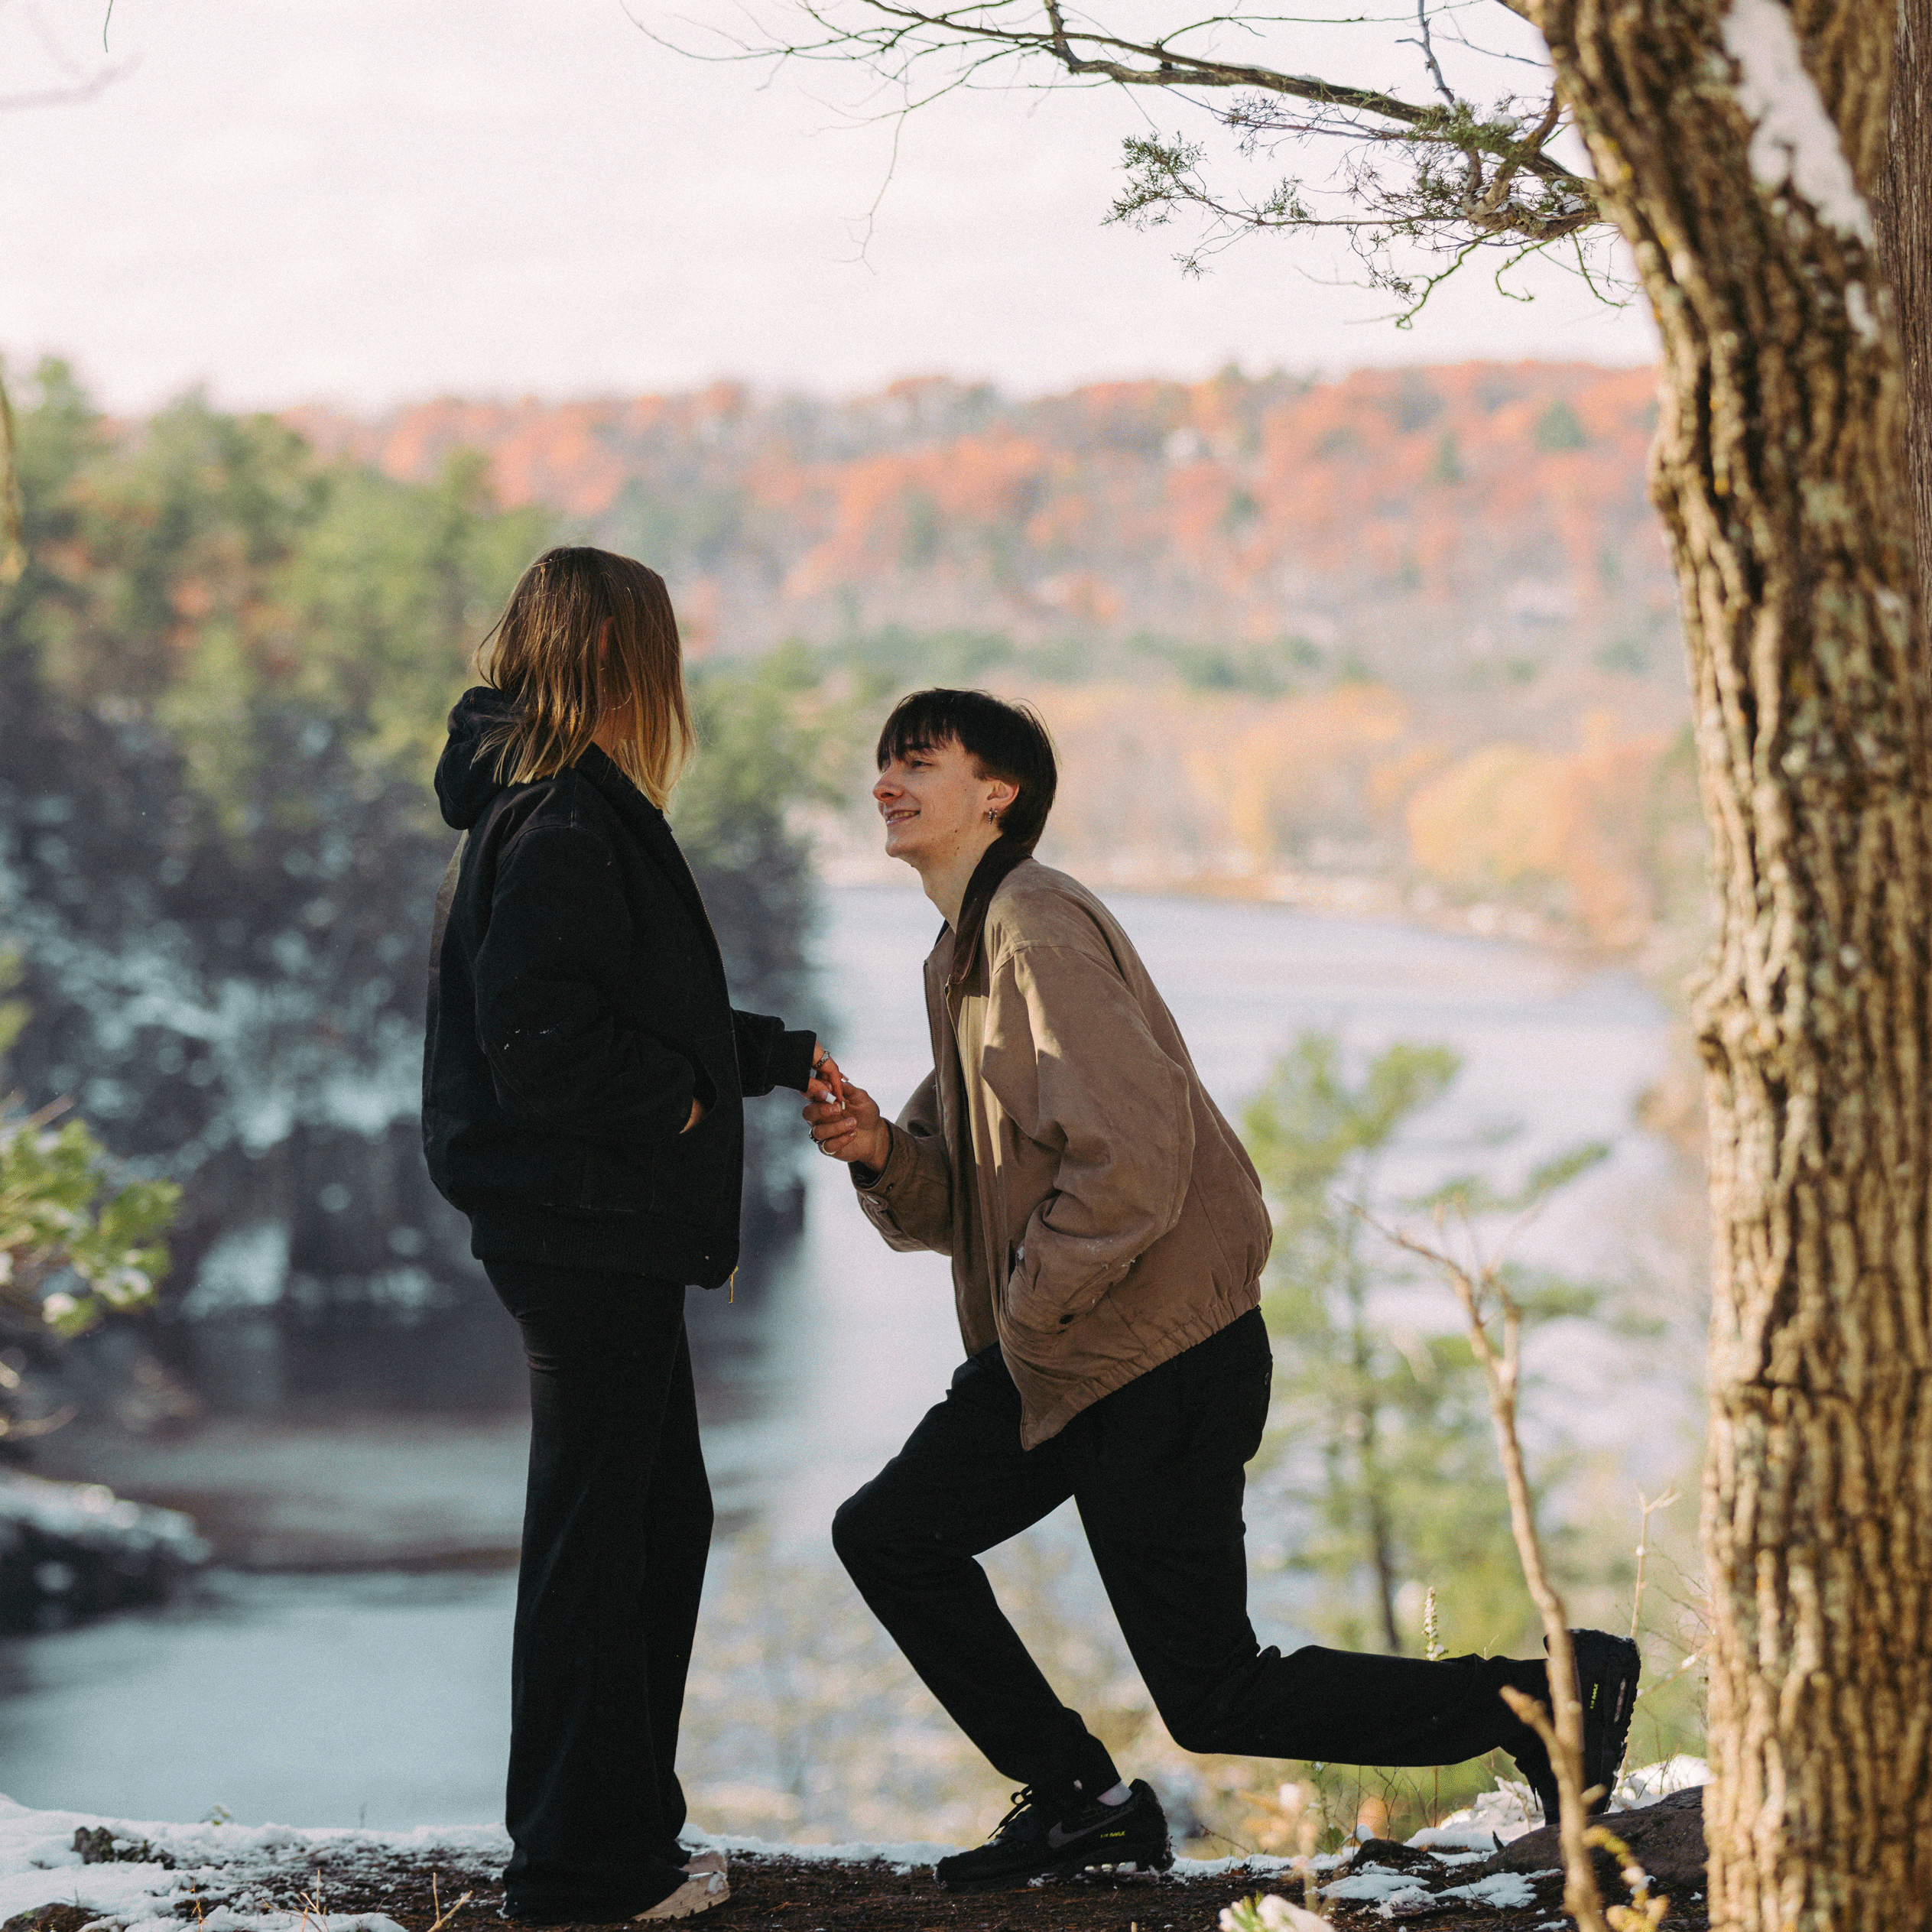 taylors falls snowy fall surprise proposal getting down on one knee documentary candid brianna kirk photography gif